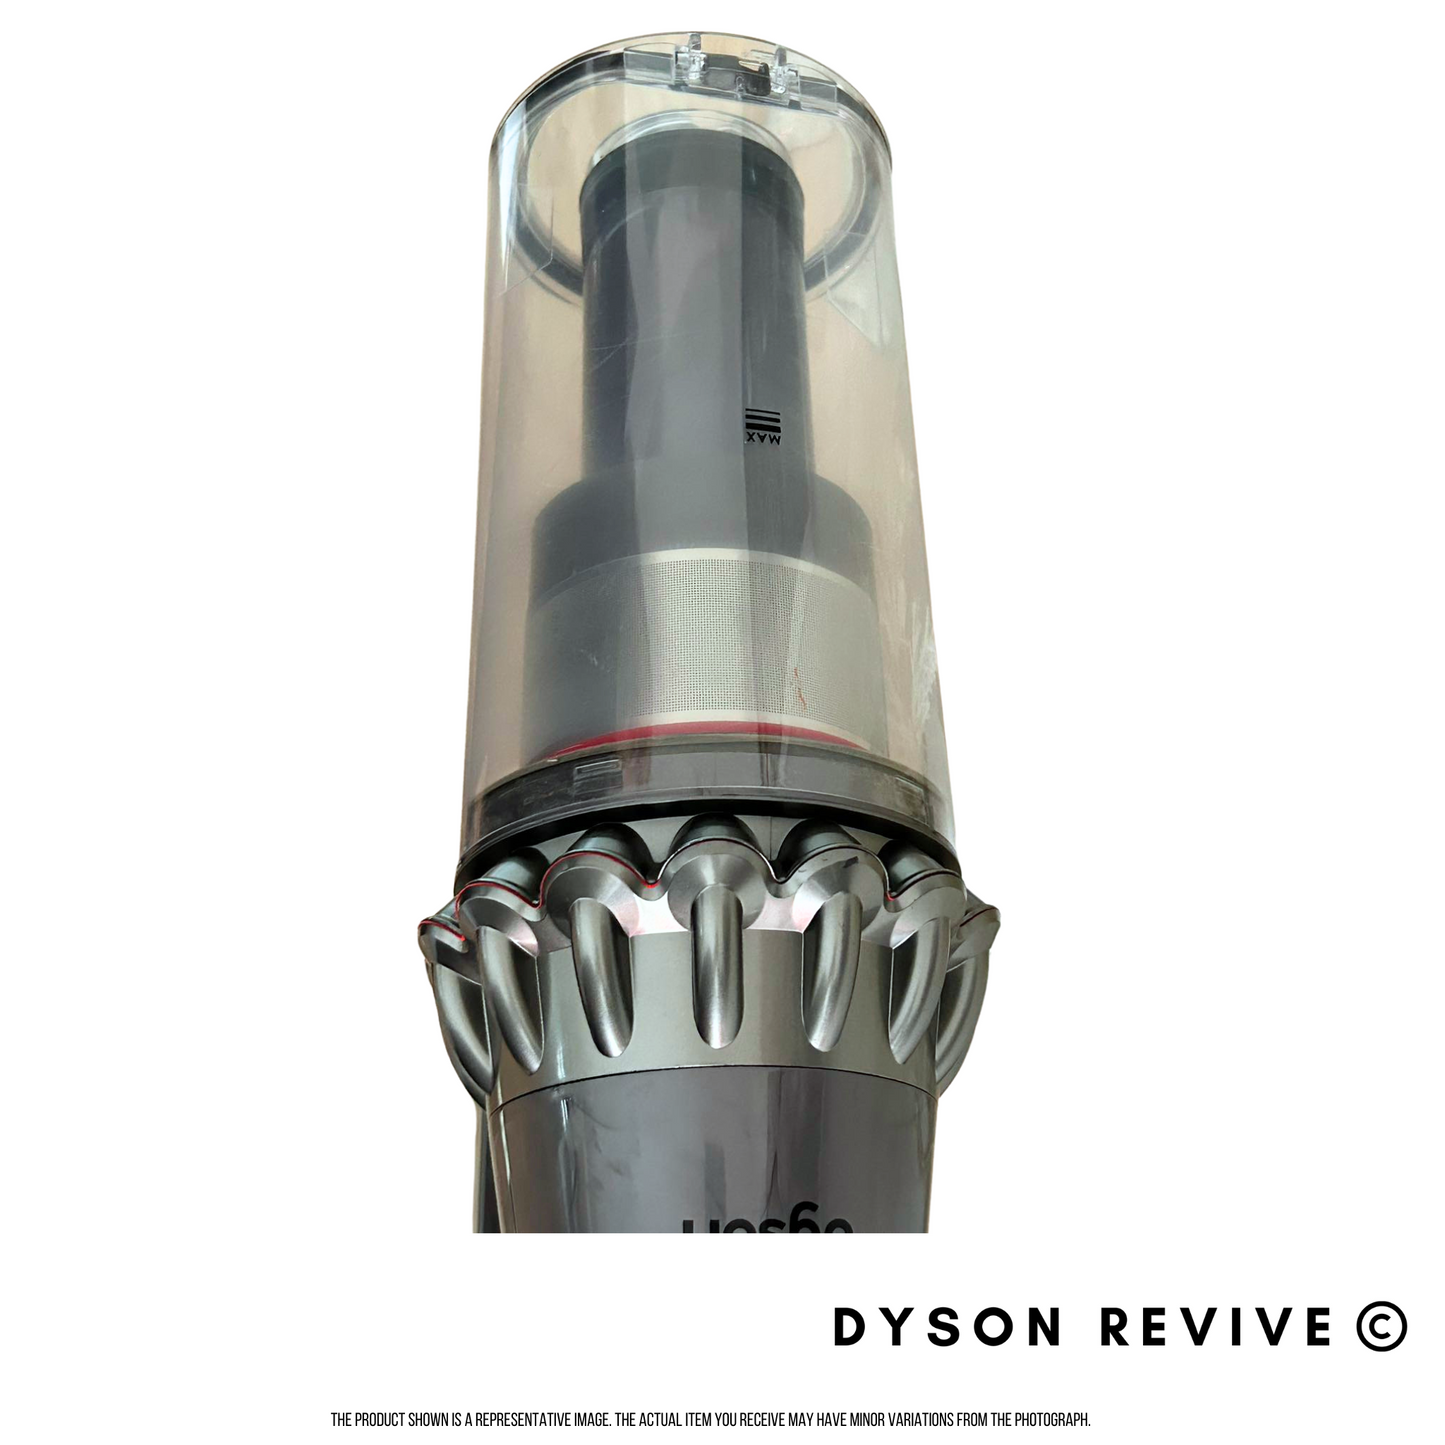 Genuine Dyson Refurbished V11 OUTSIZE Main Body With Used Genuine Dyson Battery Vacuum Cleaner